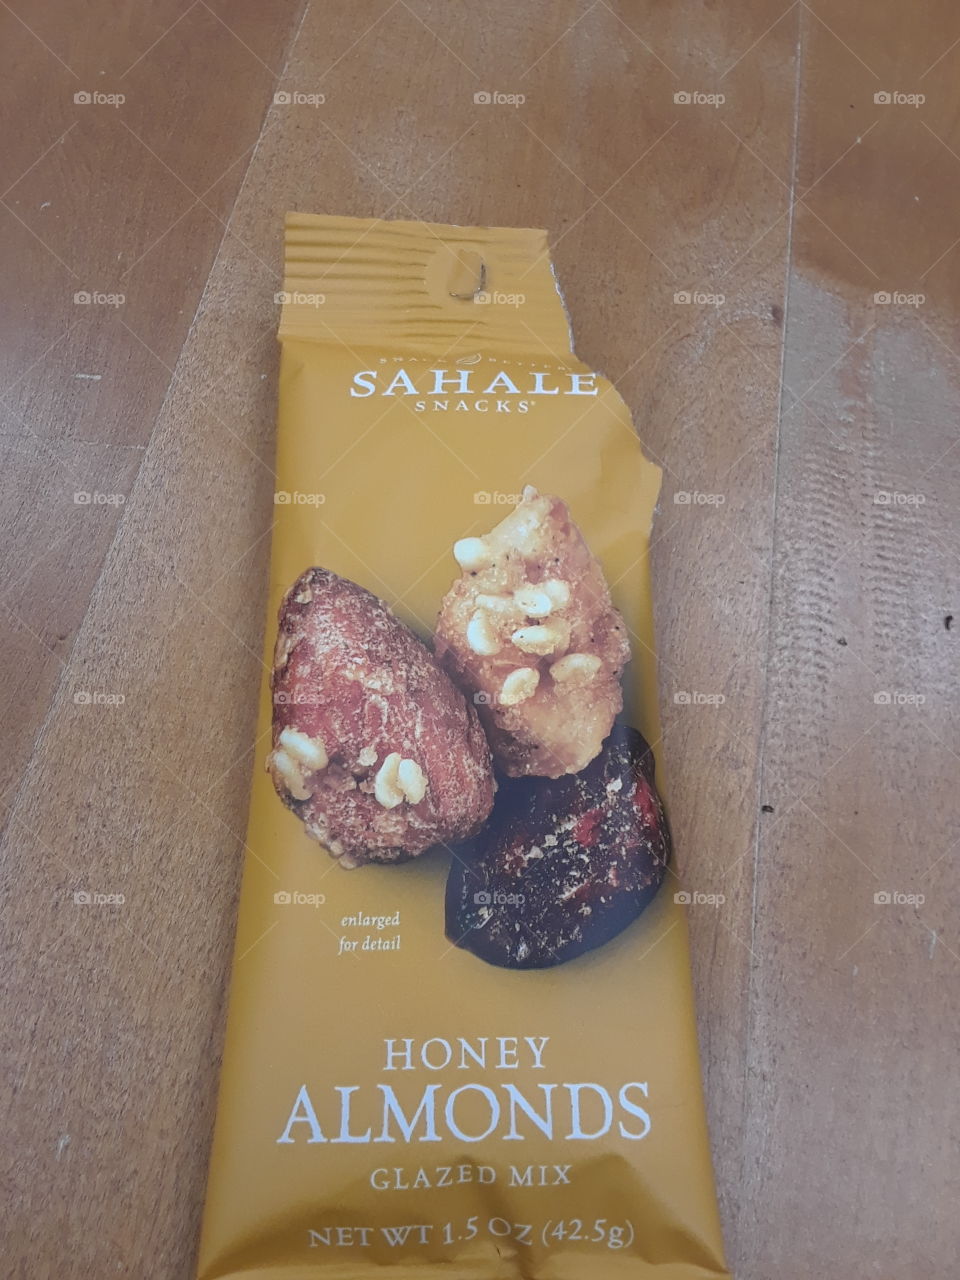 sweet and great flavor of honey almonds. after dinner snack to go with a comedy movie.Terrific snack for life.healthy living.prraching the healthy connection and emotion .